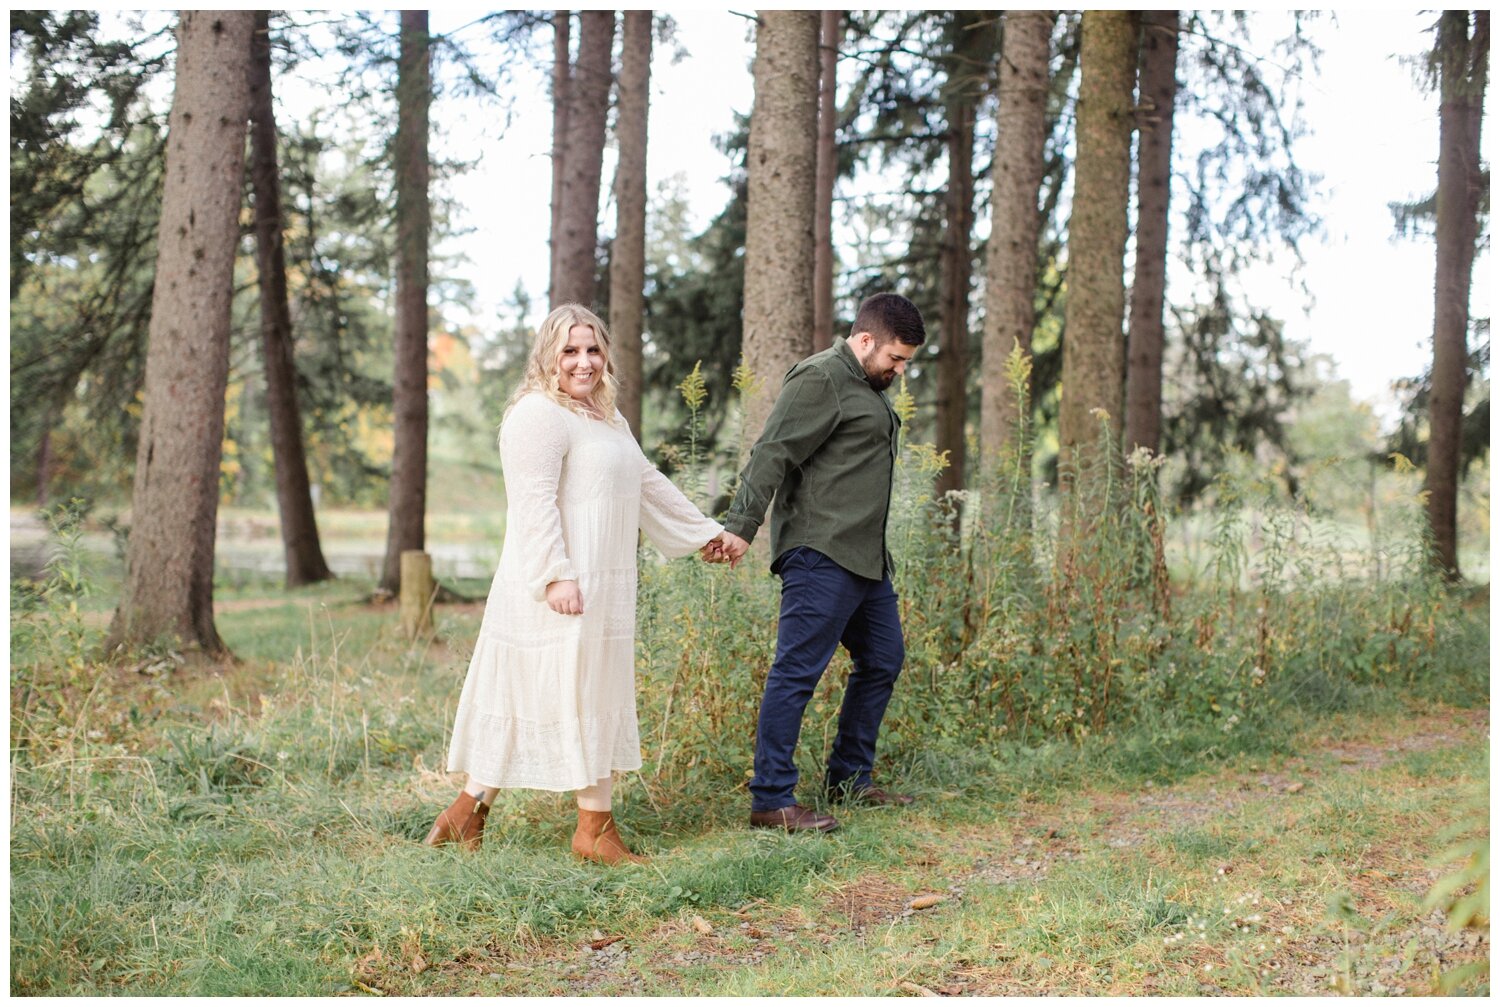 Clarks Summit PA Fall Engagement Session_0027.jpg